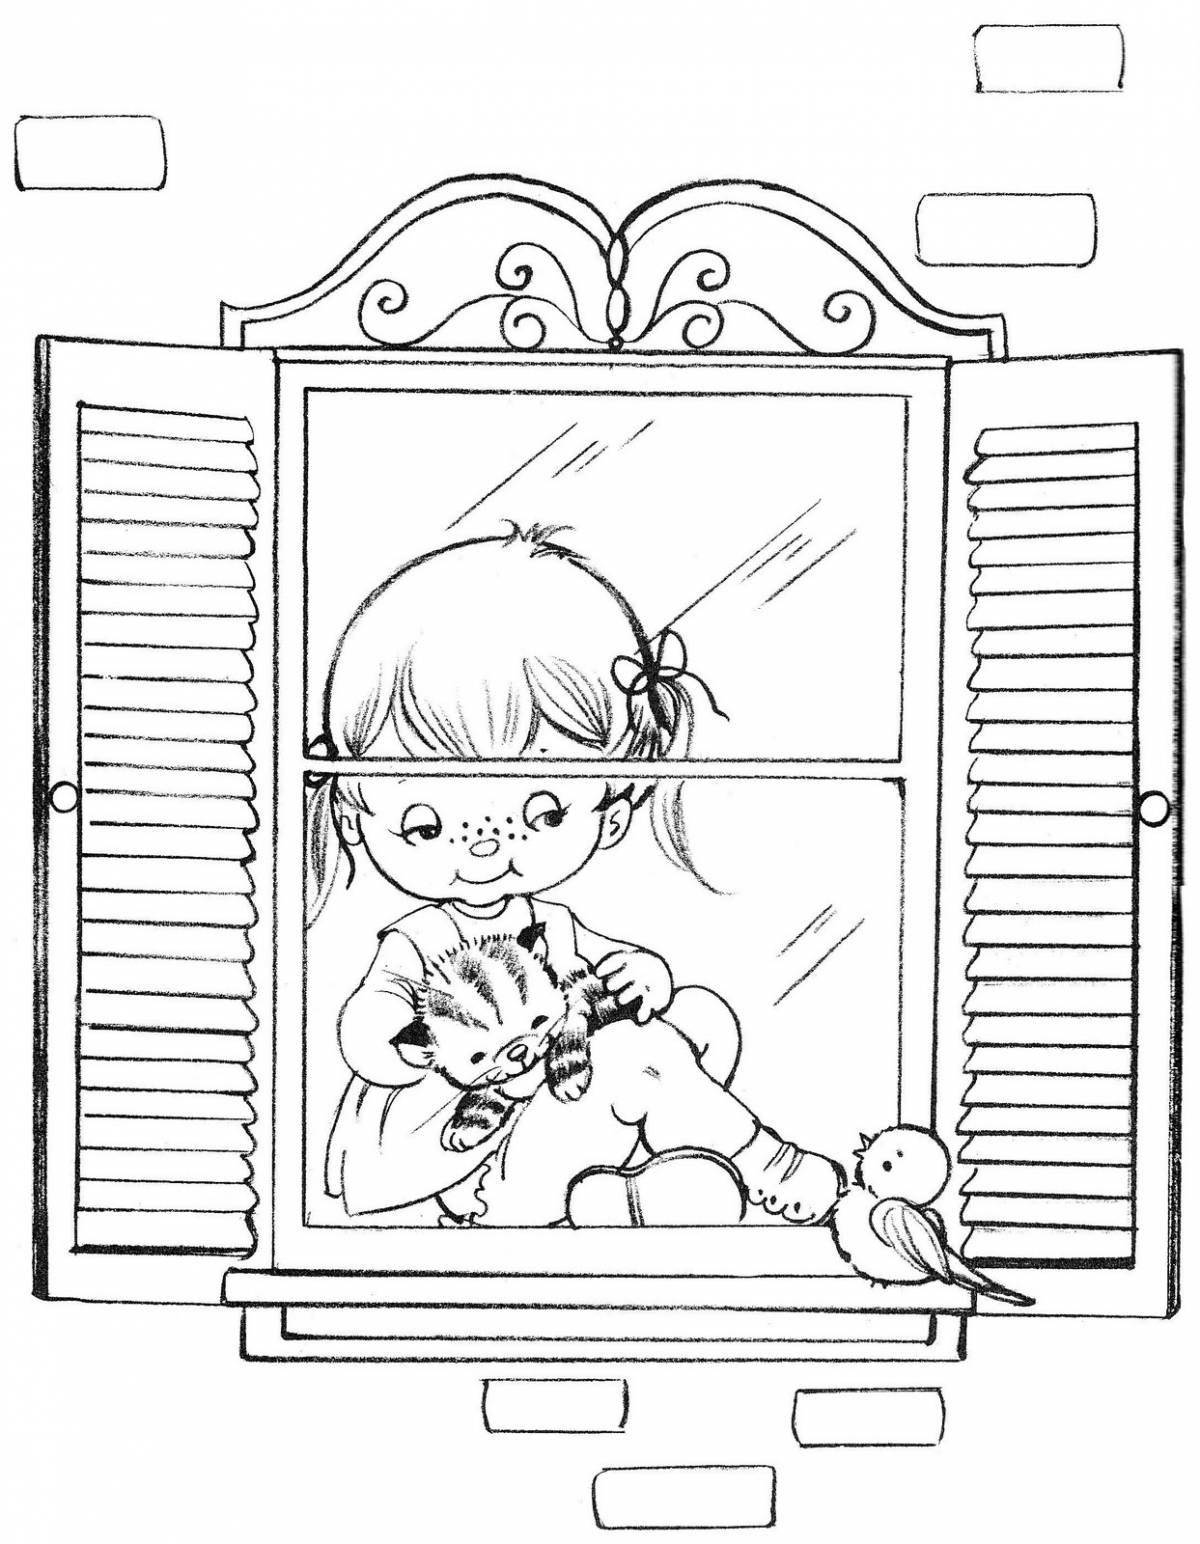 Coloring page for children